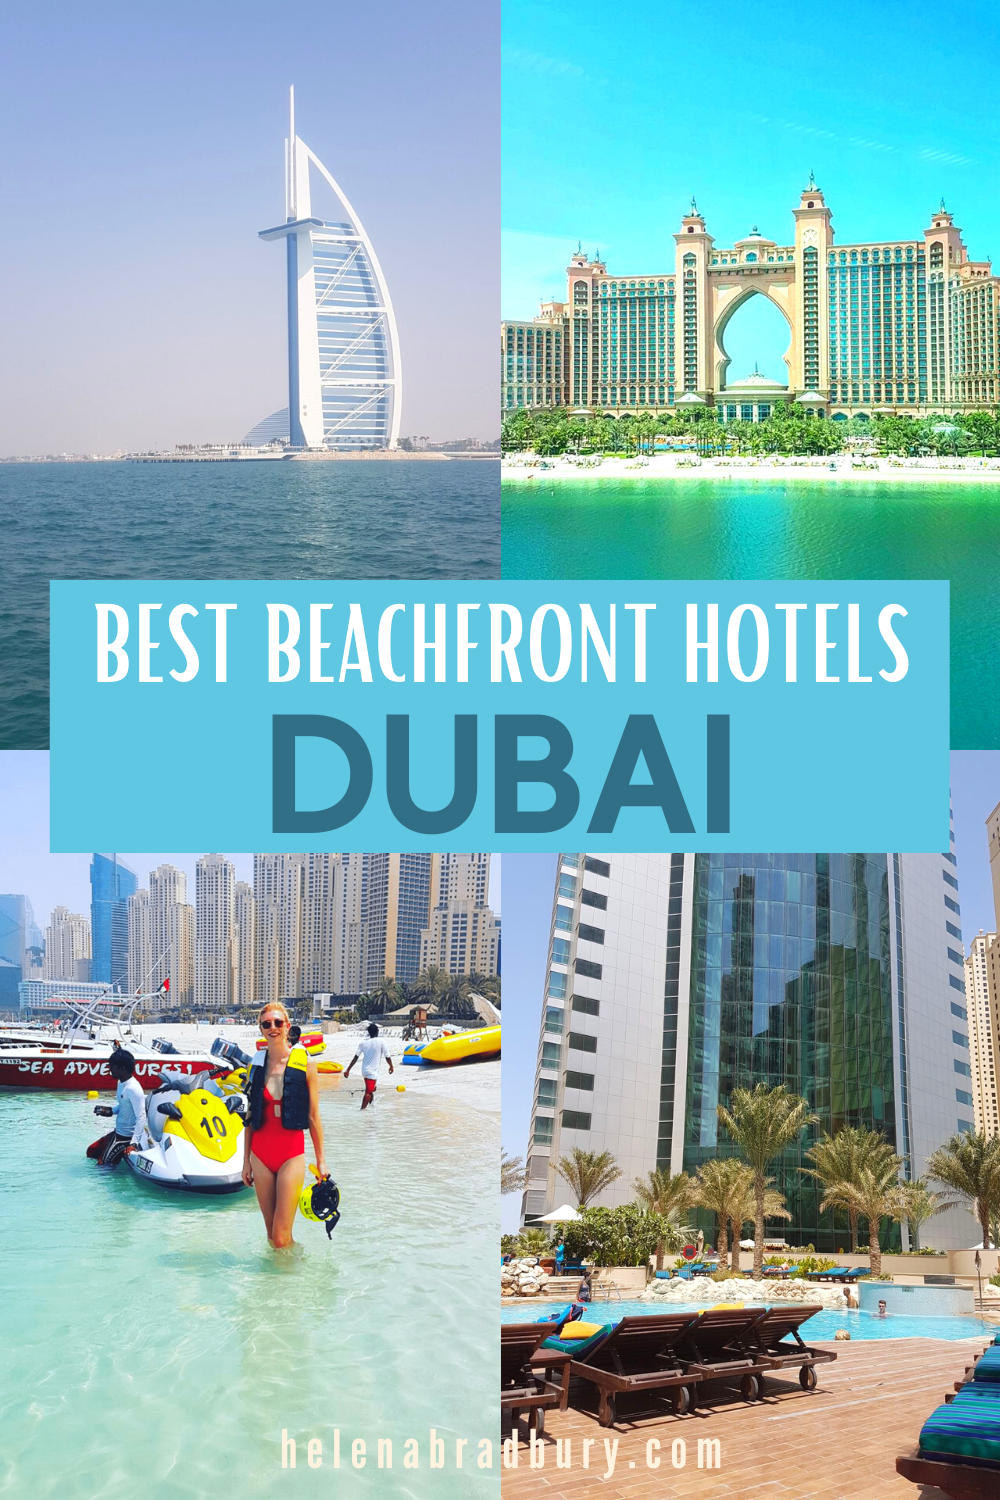 Dubai is a once in a lifetime trip! Check out my review of the beachfront hotel in Dubai that I stayed in and other options to consider on your search for the best beachfront hotels in Dubai | dubai beach hotel | dubai beach jumeirah luxury hotels |